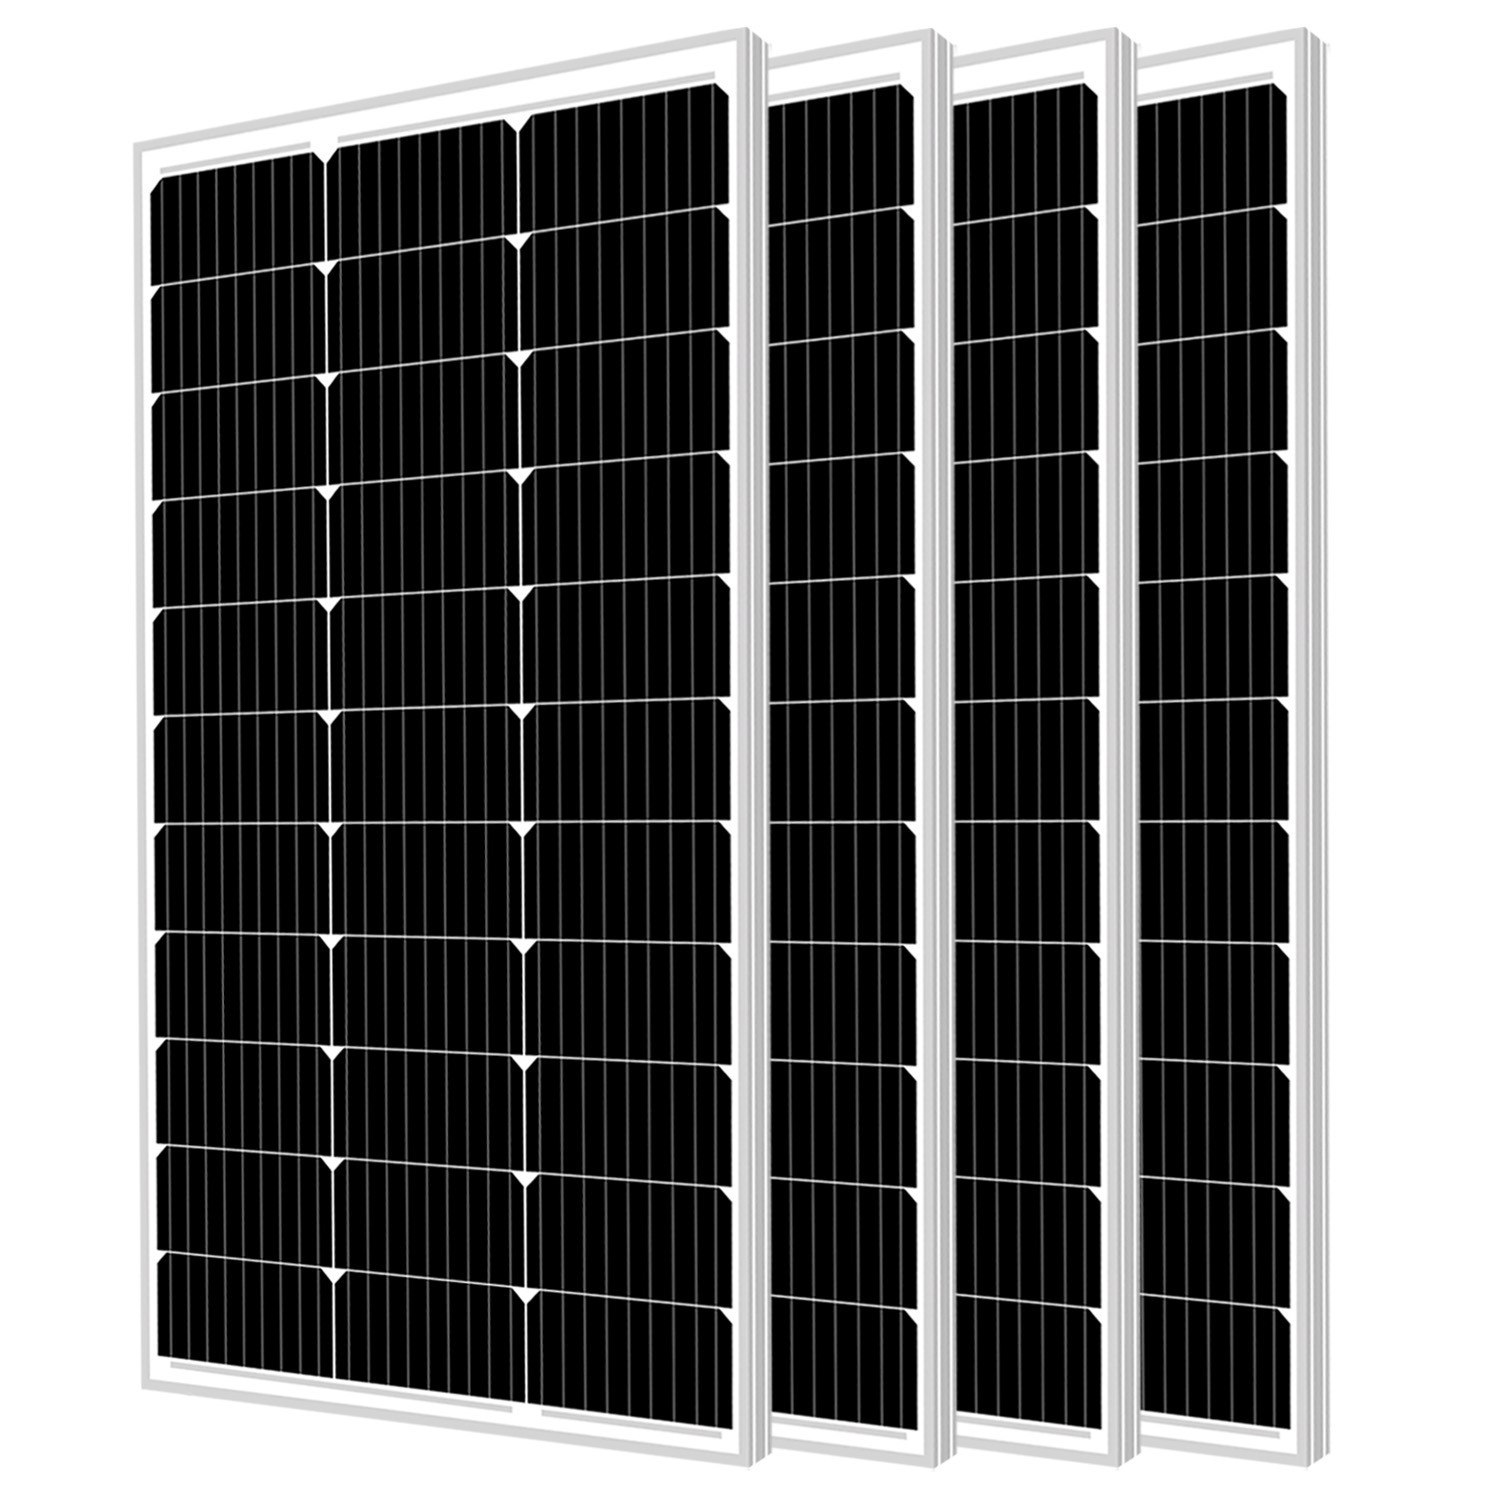 100W Solar Panel 12V Mono Off Grid Battery Charger for Rooftop Residential Commercial House - 4 Pack